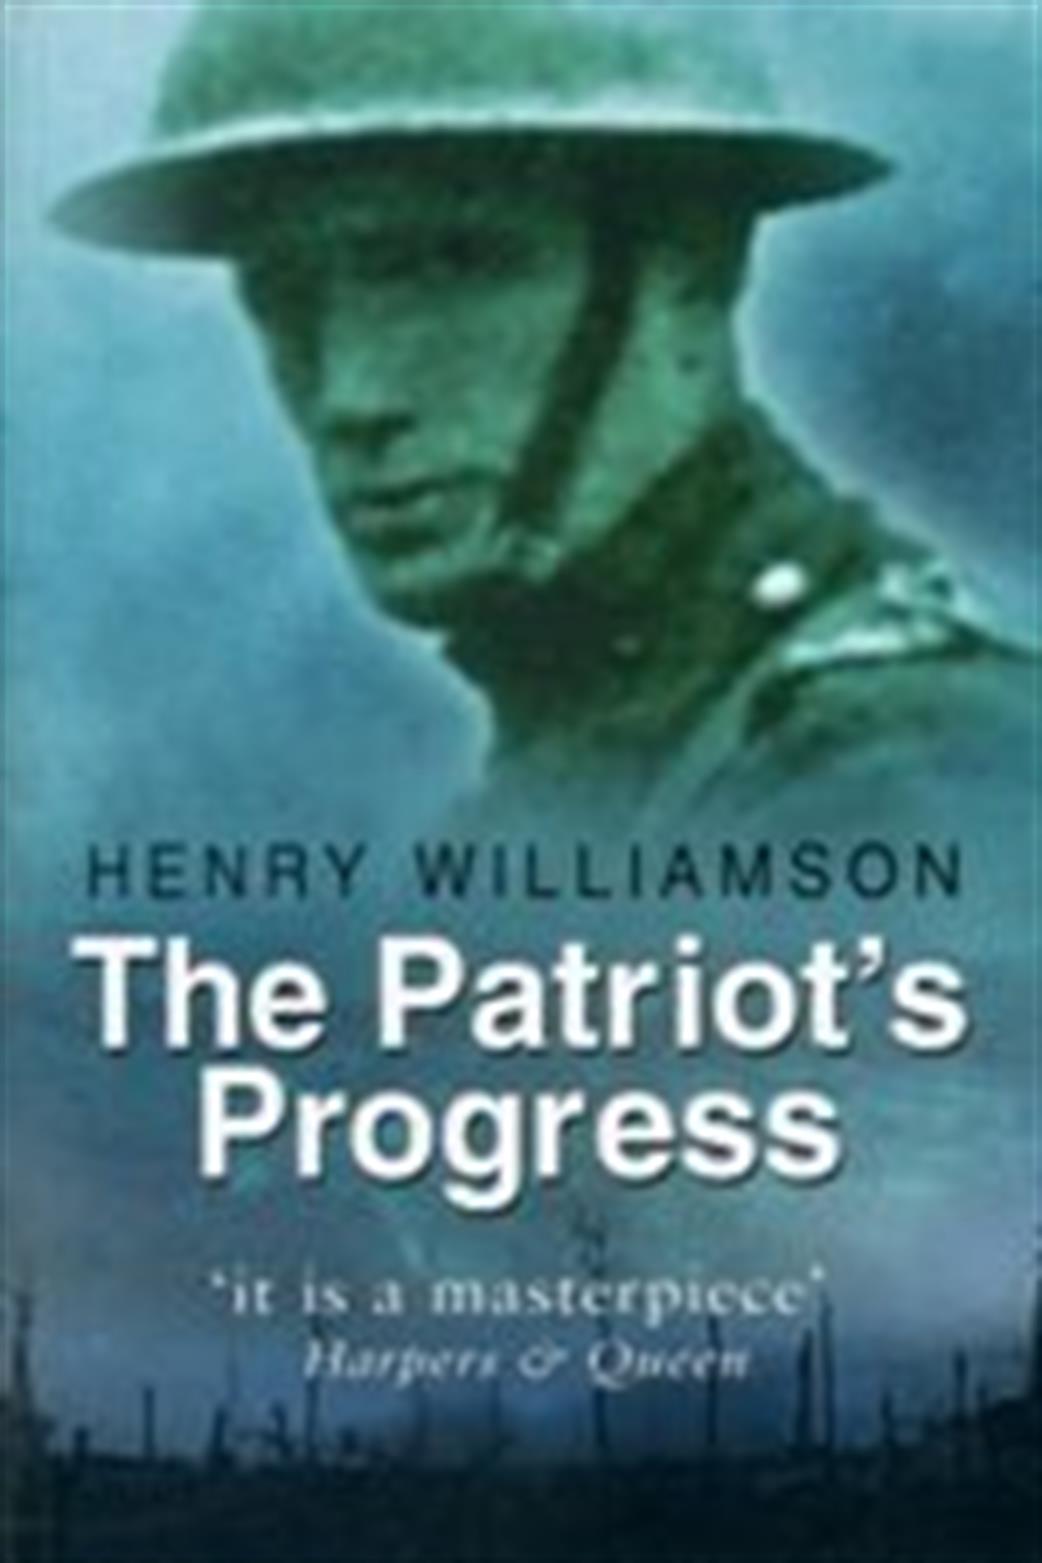 Sutton Publishing  0-7509-3640-1 The Patriots' Progress by Henry Williamson